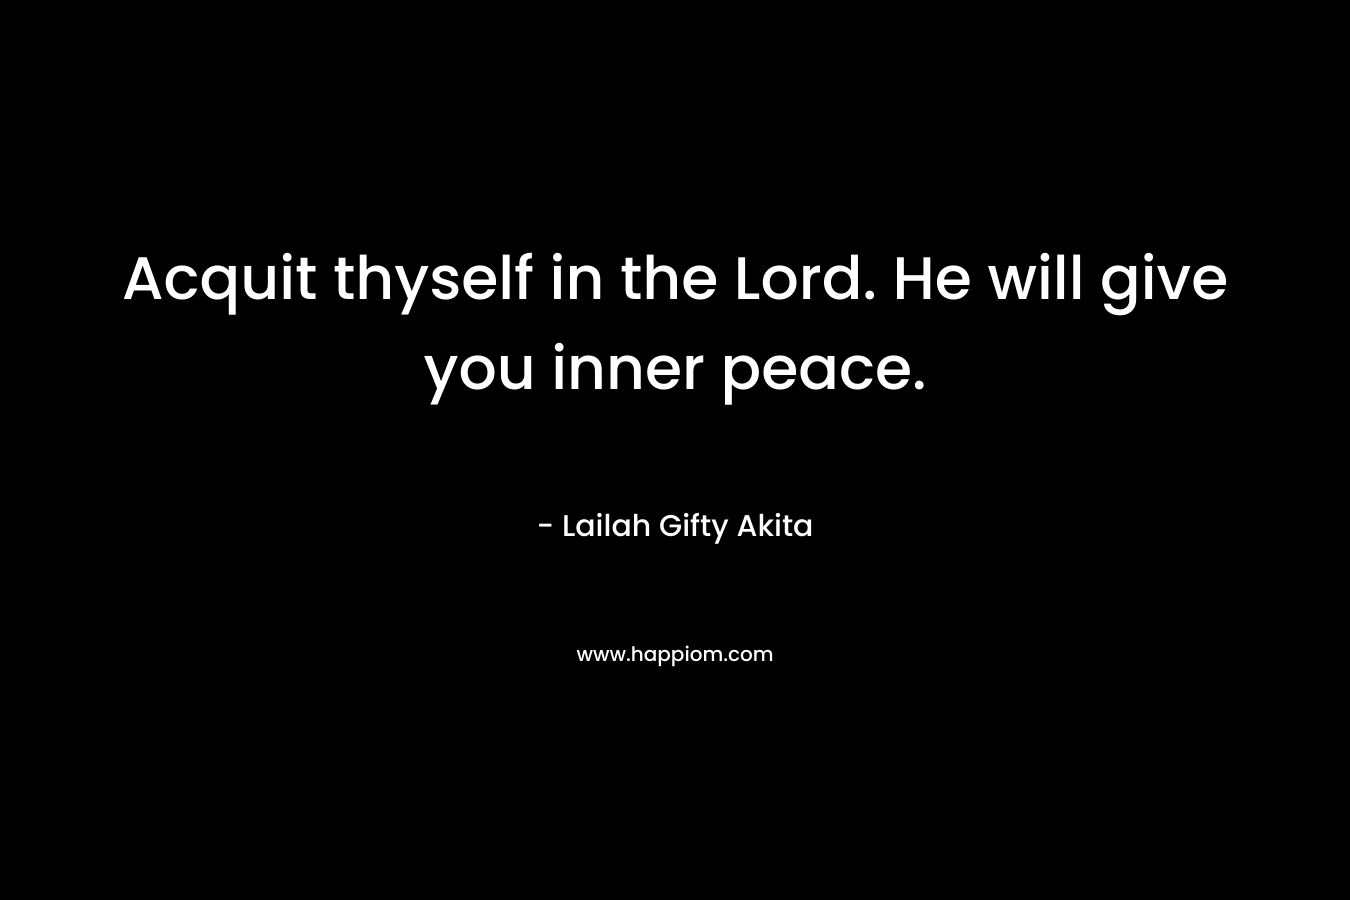 Acquit thyself in the Lord. He will give you inner peace.